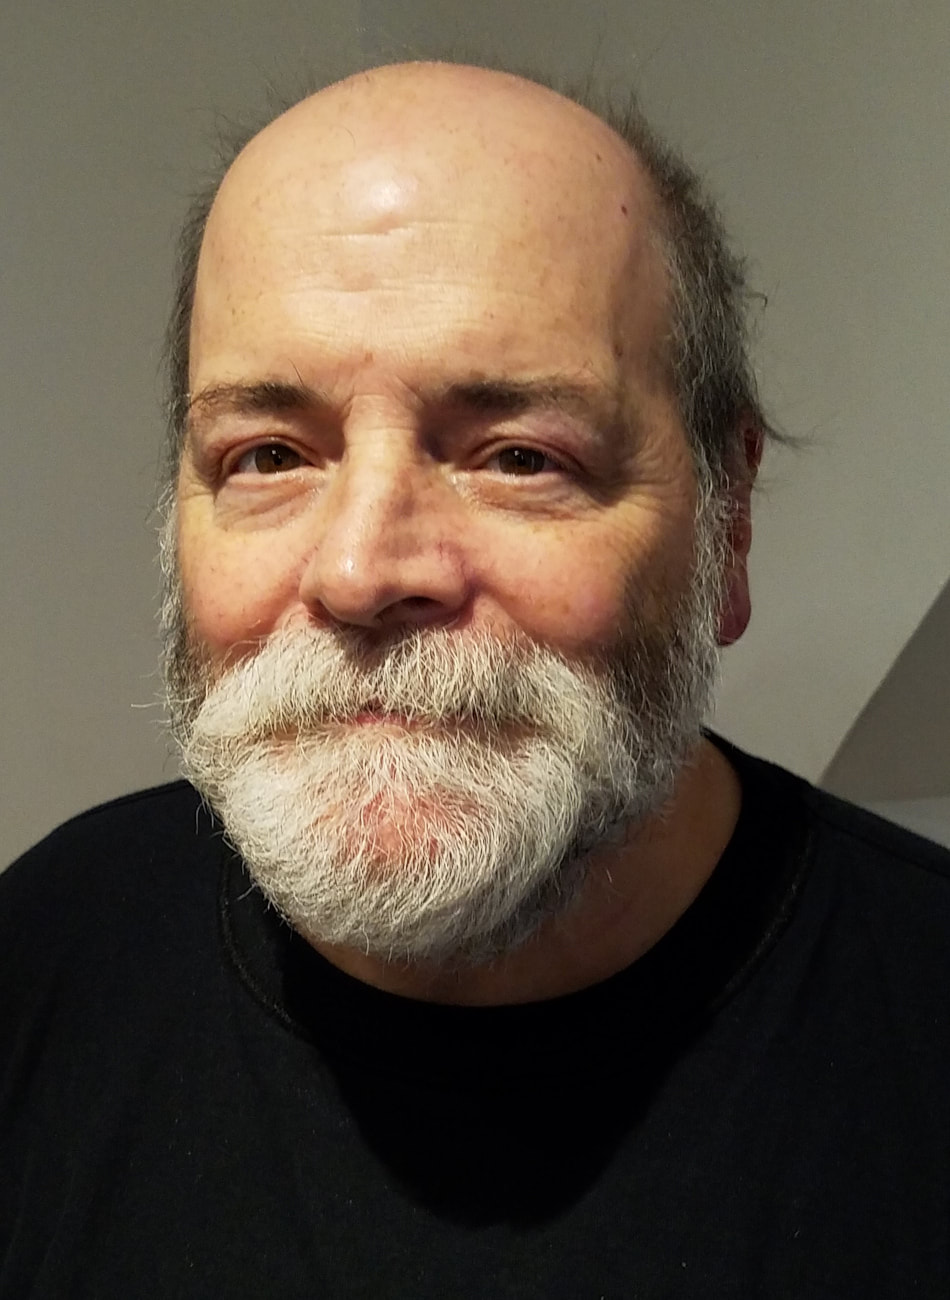 Photo of Tony Ferreira, a white man with brown eyes, salt-and-pepper hair in a tonsure around his head, and a full salt-and-pepper beard and sideburns, looking directly at the camera with a smile. Only his head and shoulders are visible against a white background. He is wearing a black shirt with a crew neckline.